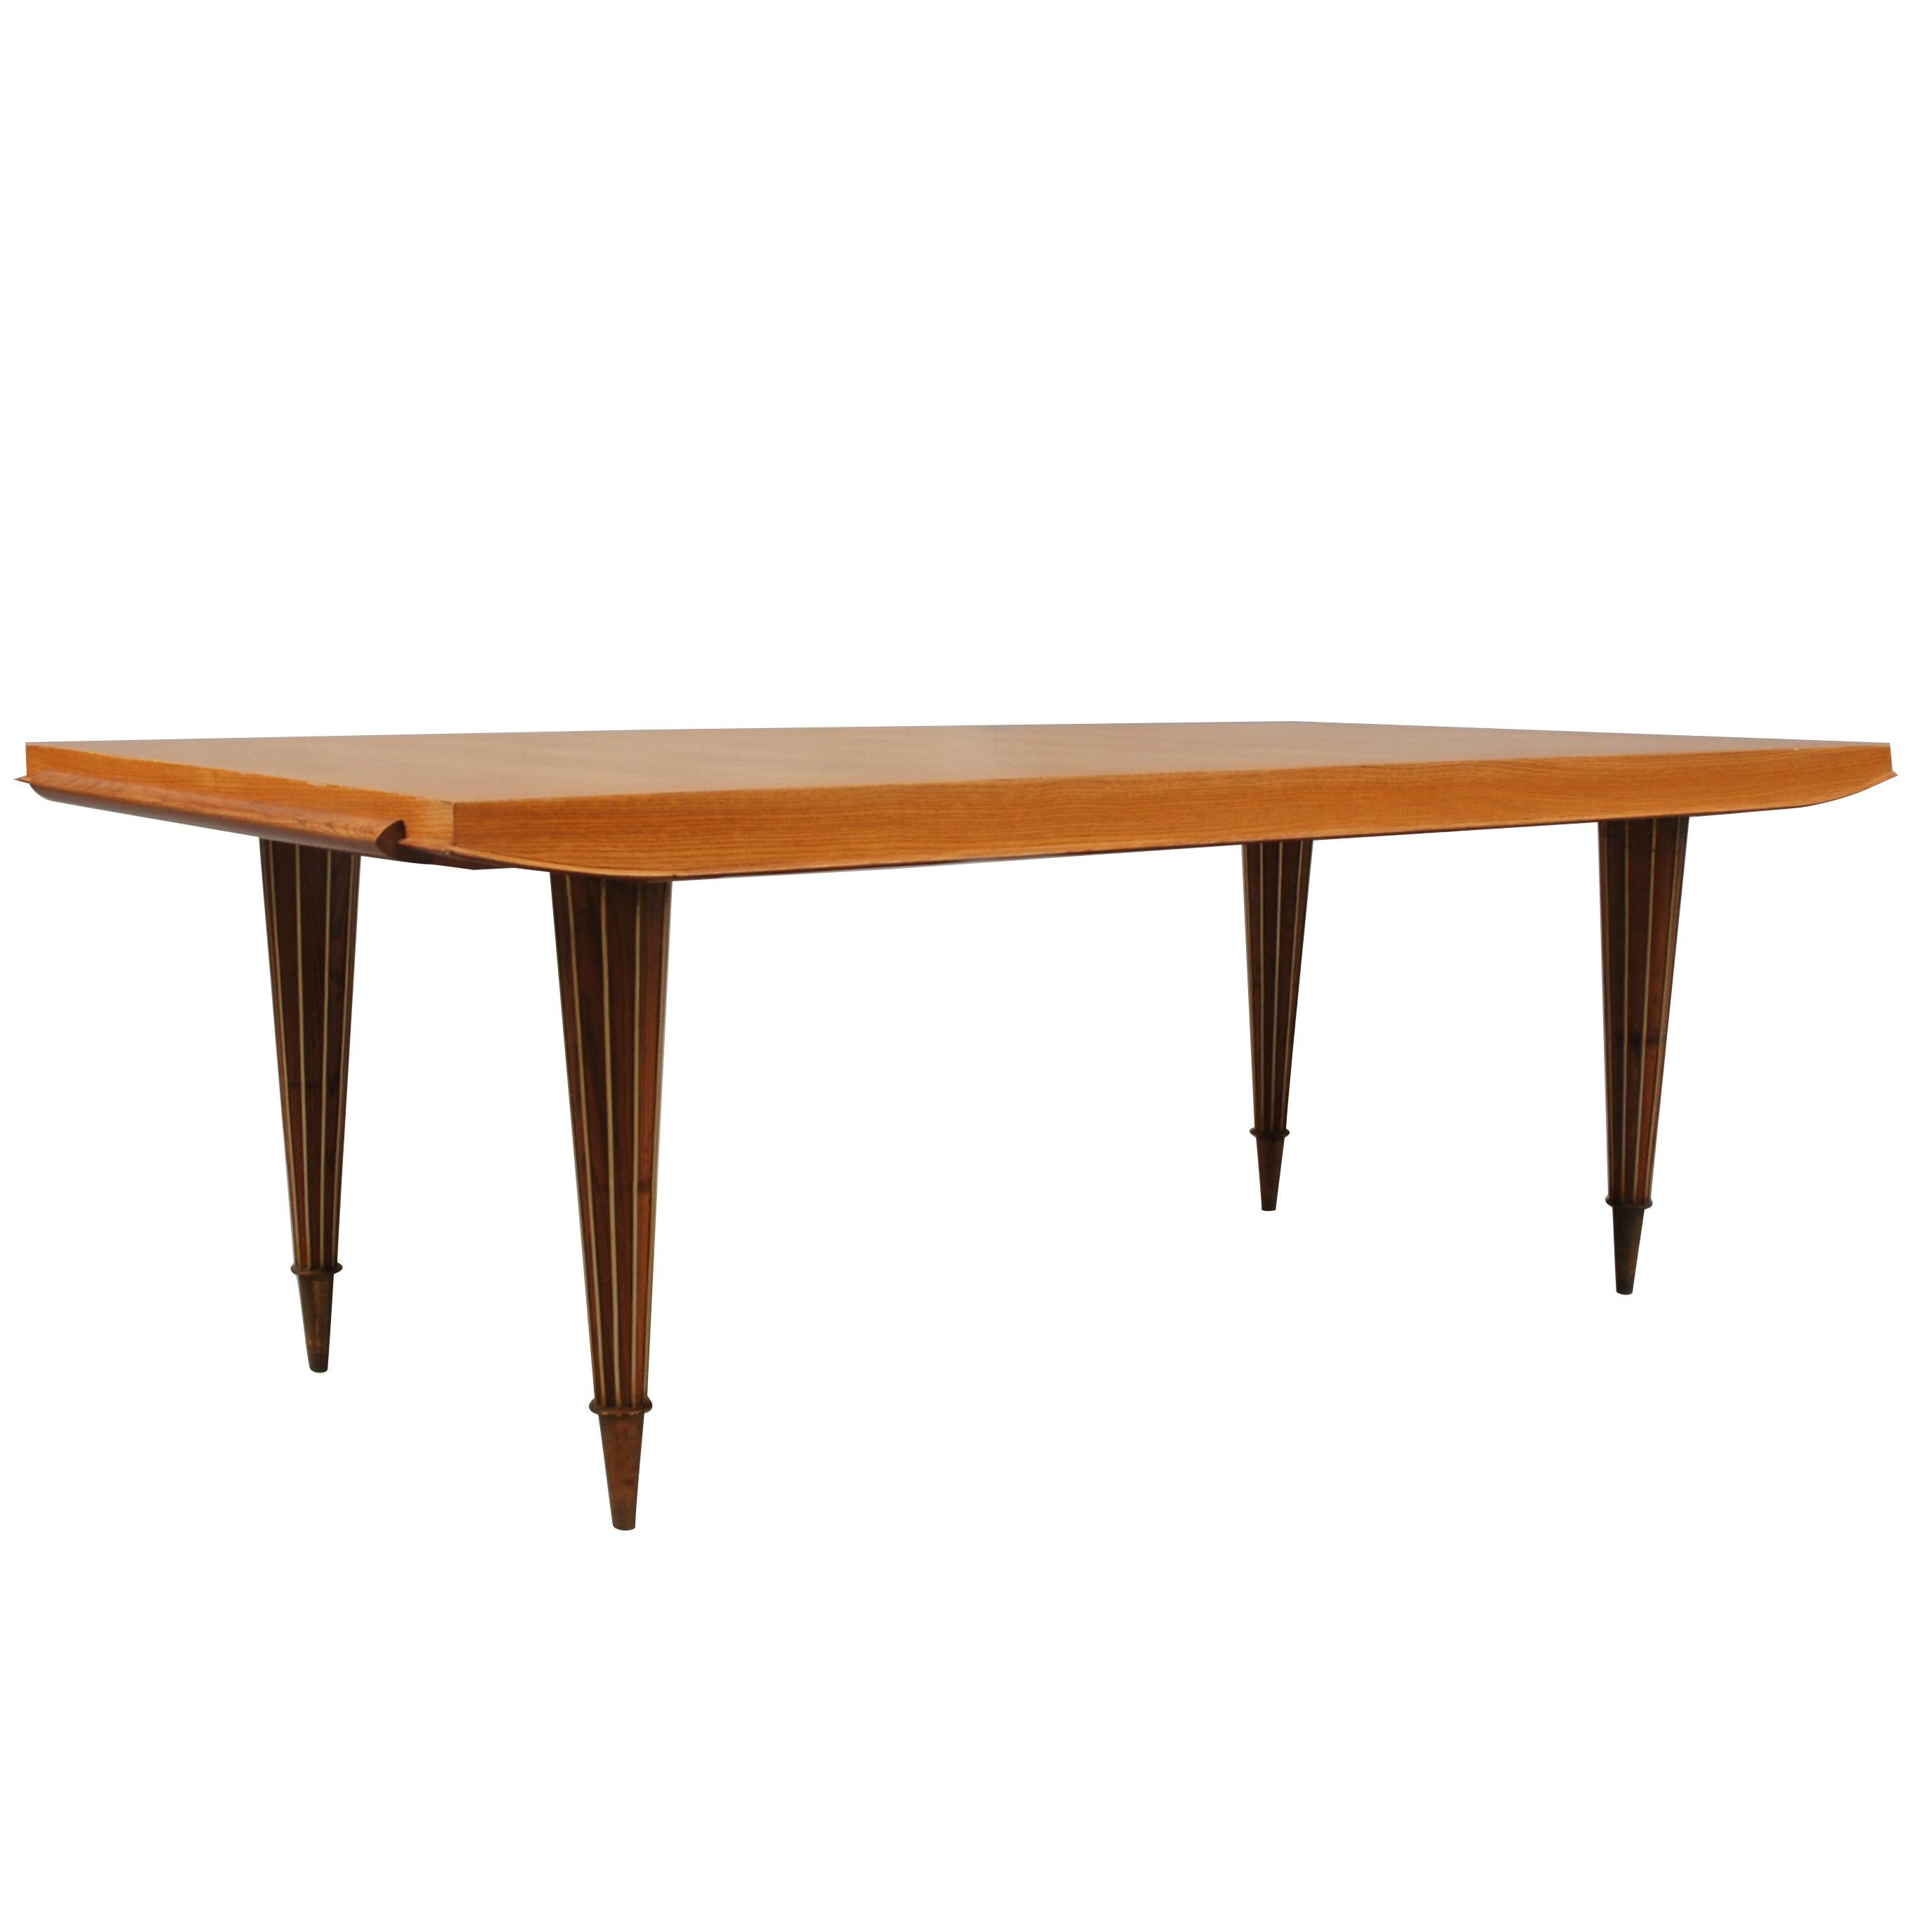 A Fine French Art Deco Expandable Dining Table with Ribbed Brass Conical Legs For Sale